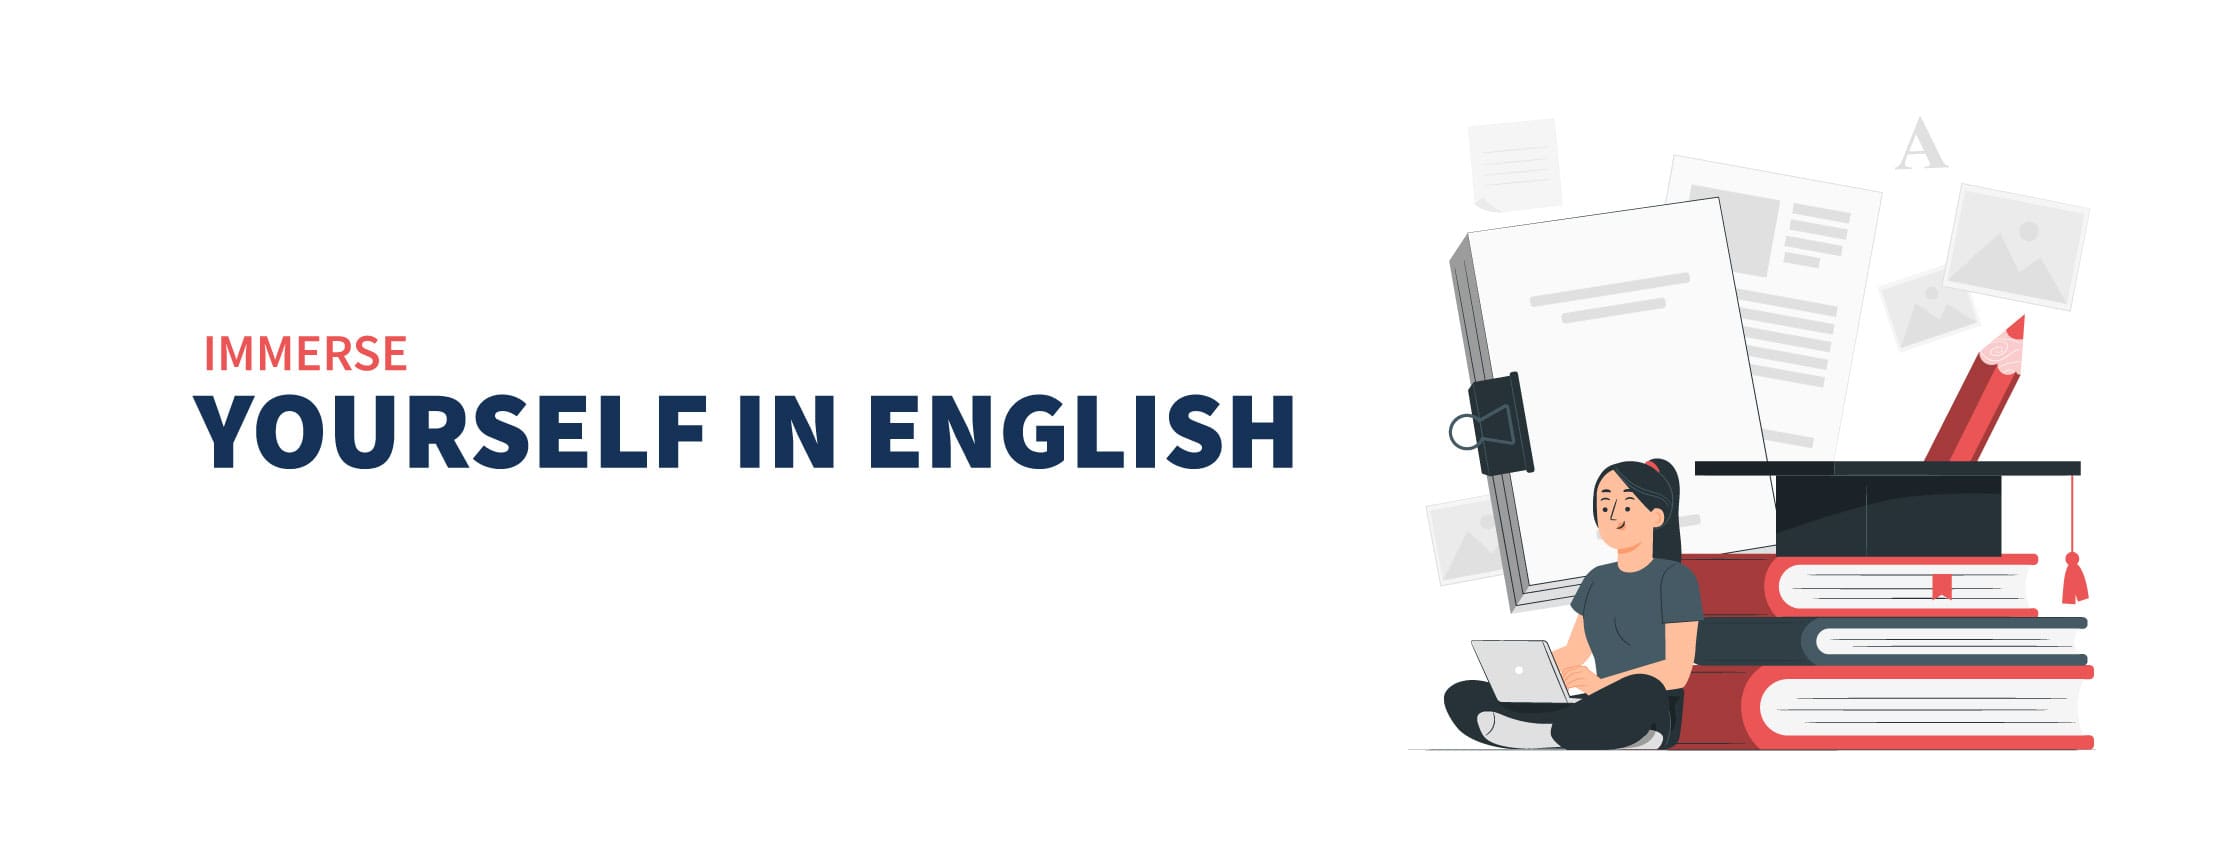 Immerse Yourself in English